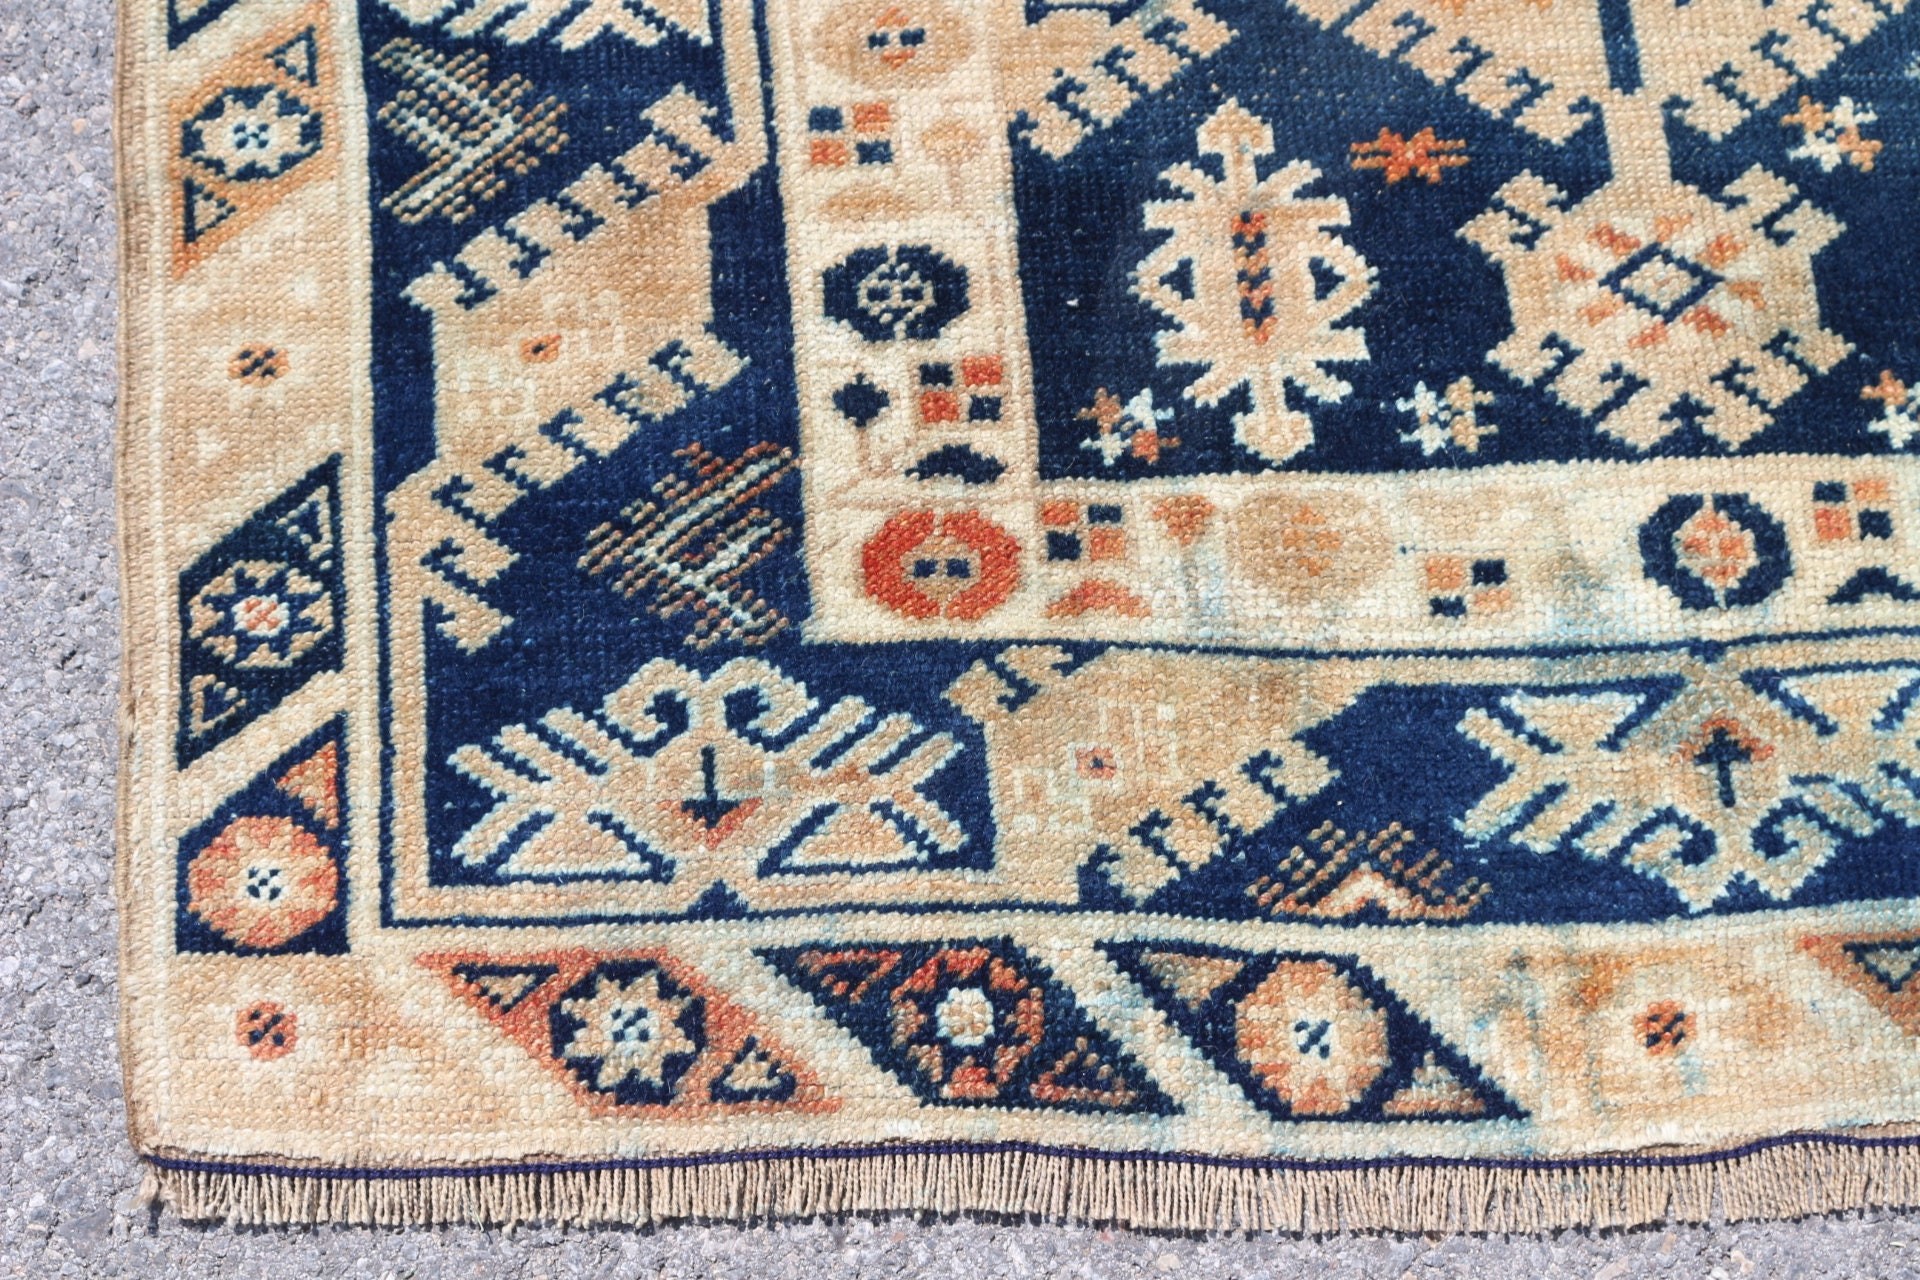 Nursery Rugs, Yellow  3.8x6.4 ft Area Rug, Vintage Rug, Aztec Rug, Antique Rug, Turkish Rugs, Rugs for Kitchen